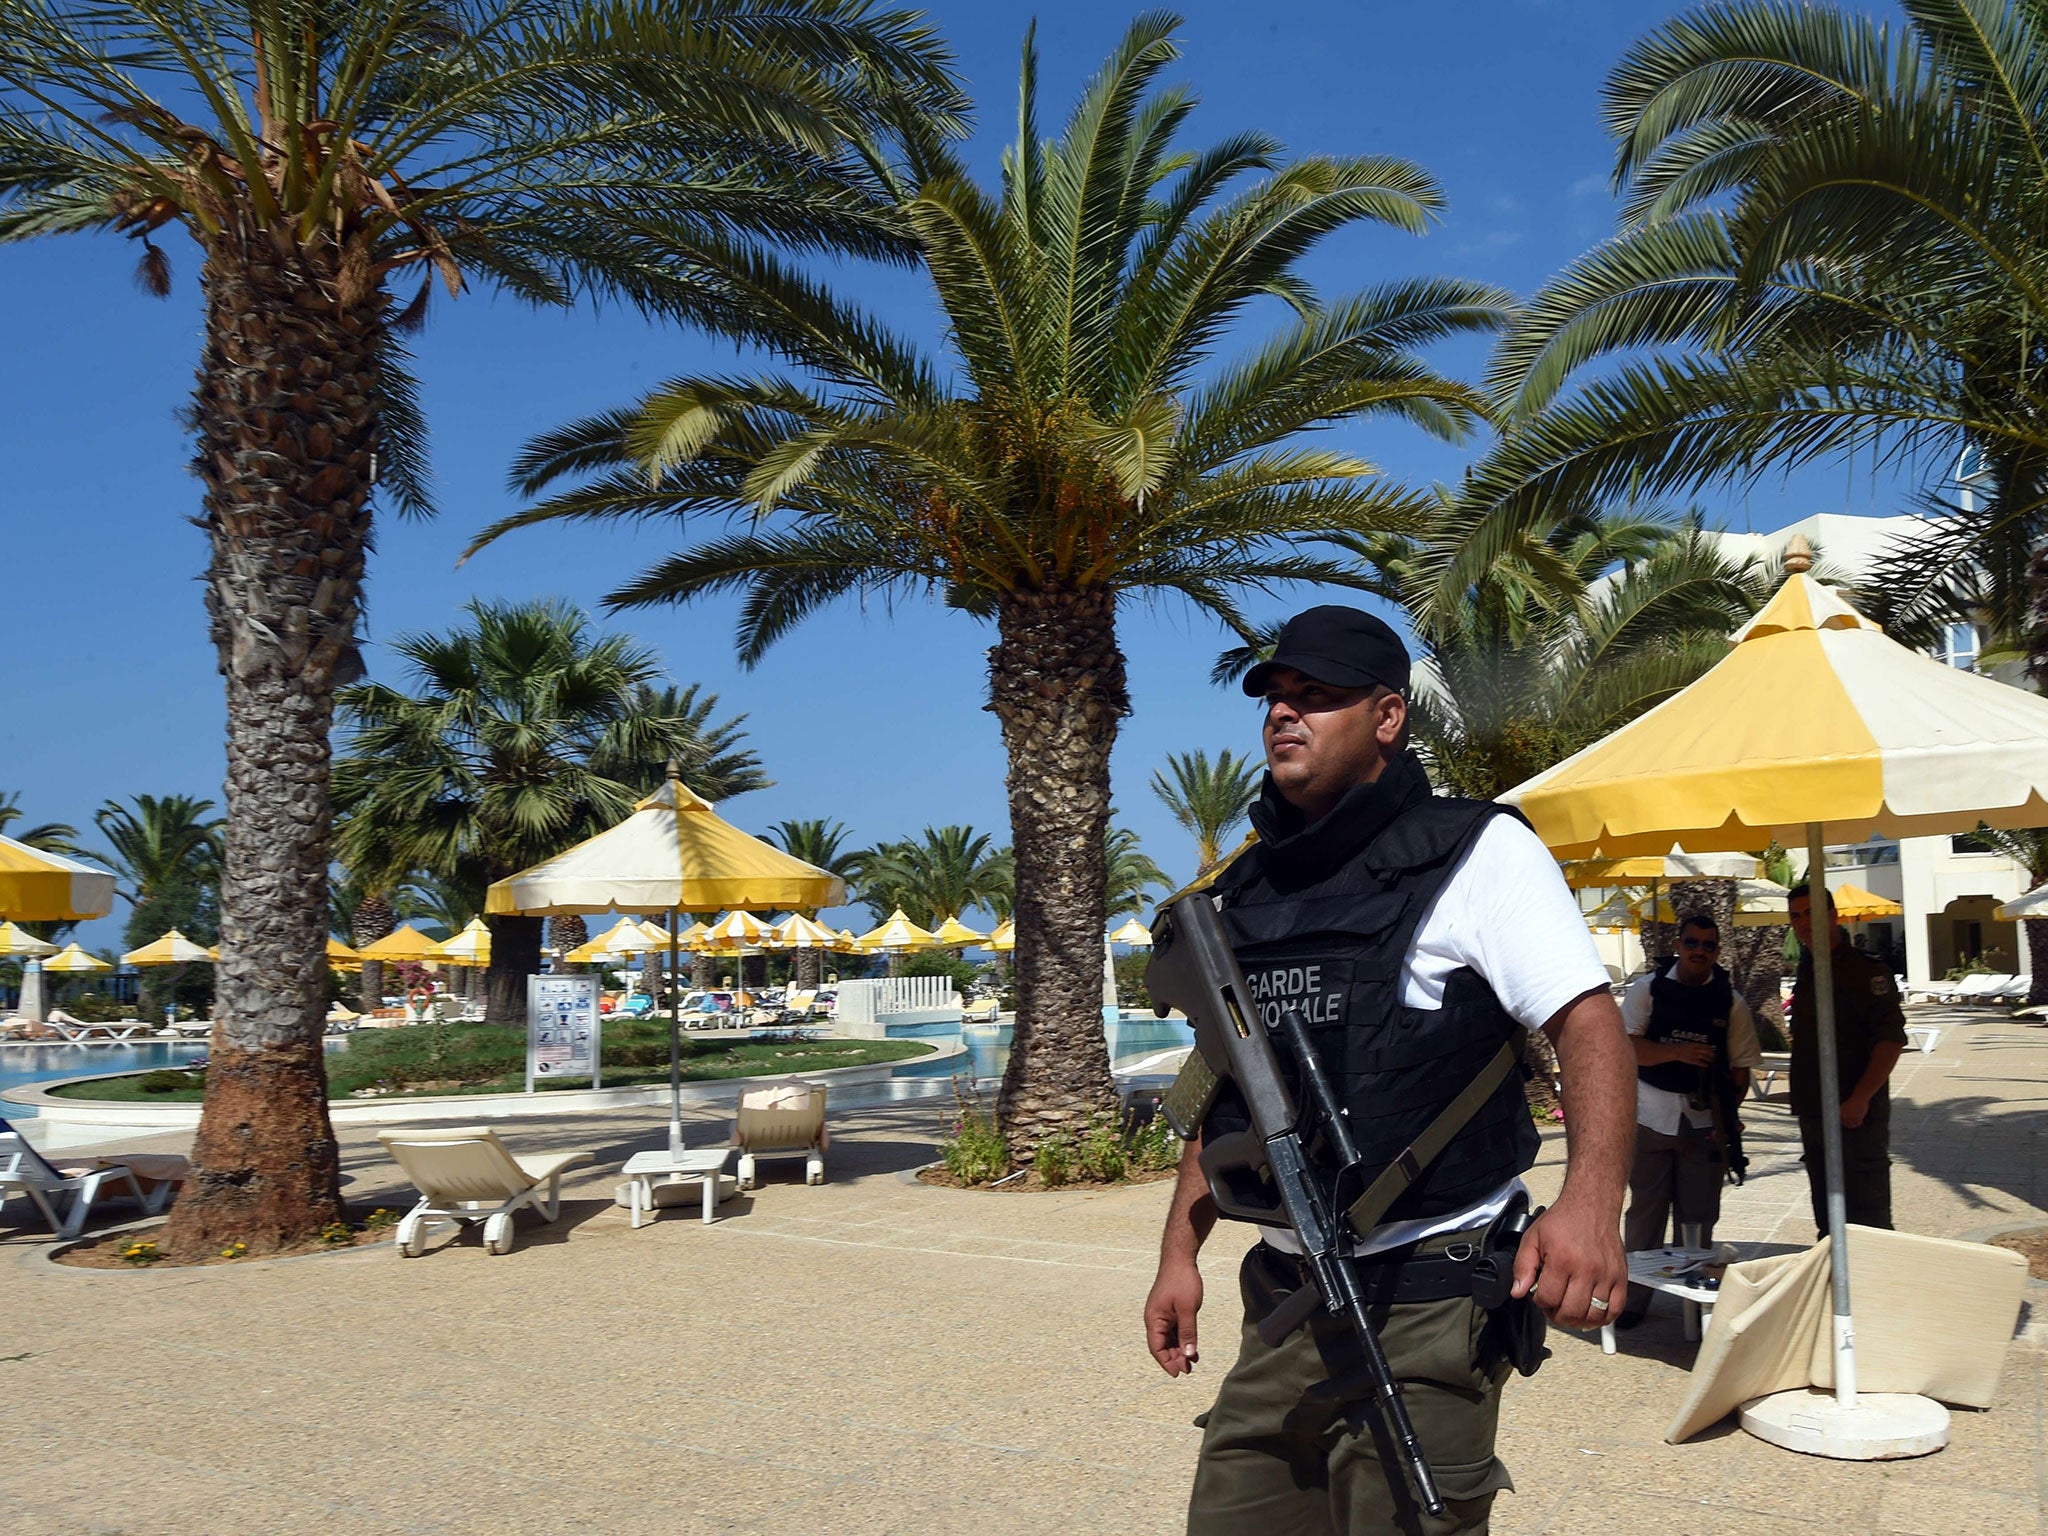 A Tunisian security member stands next to a swimming pool at the resort town of Sousse following a shooting attack